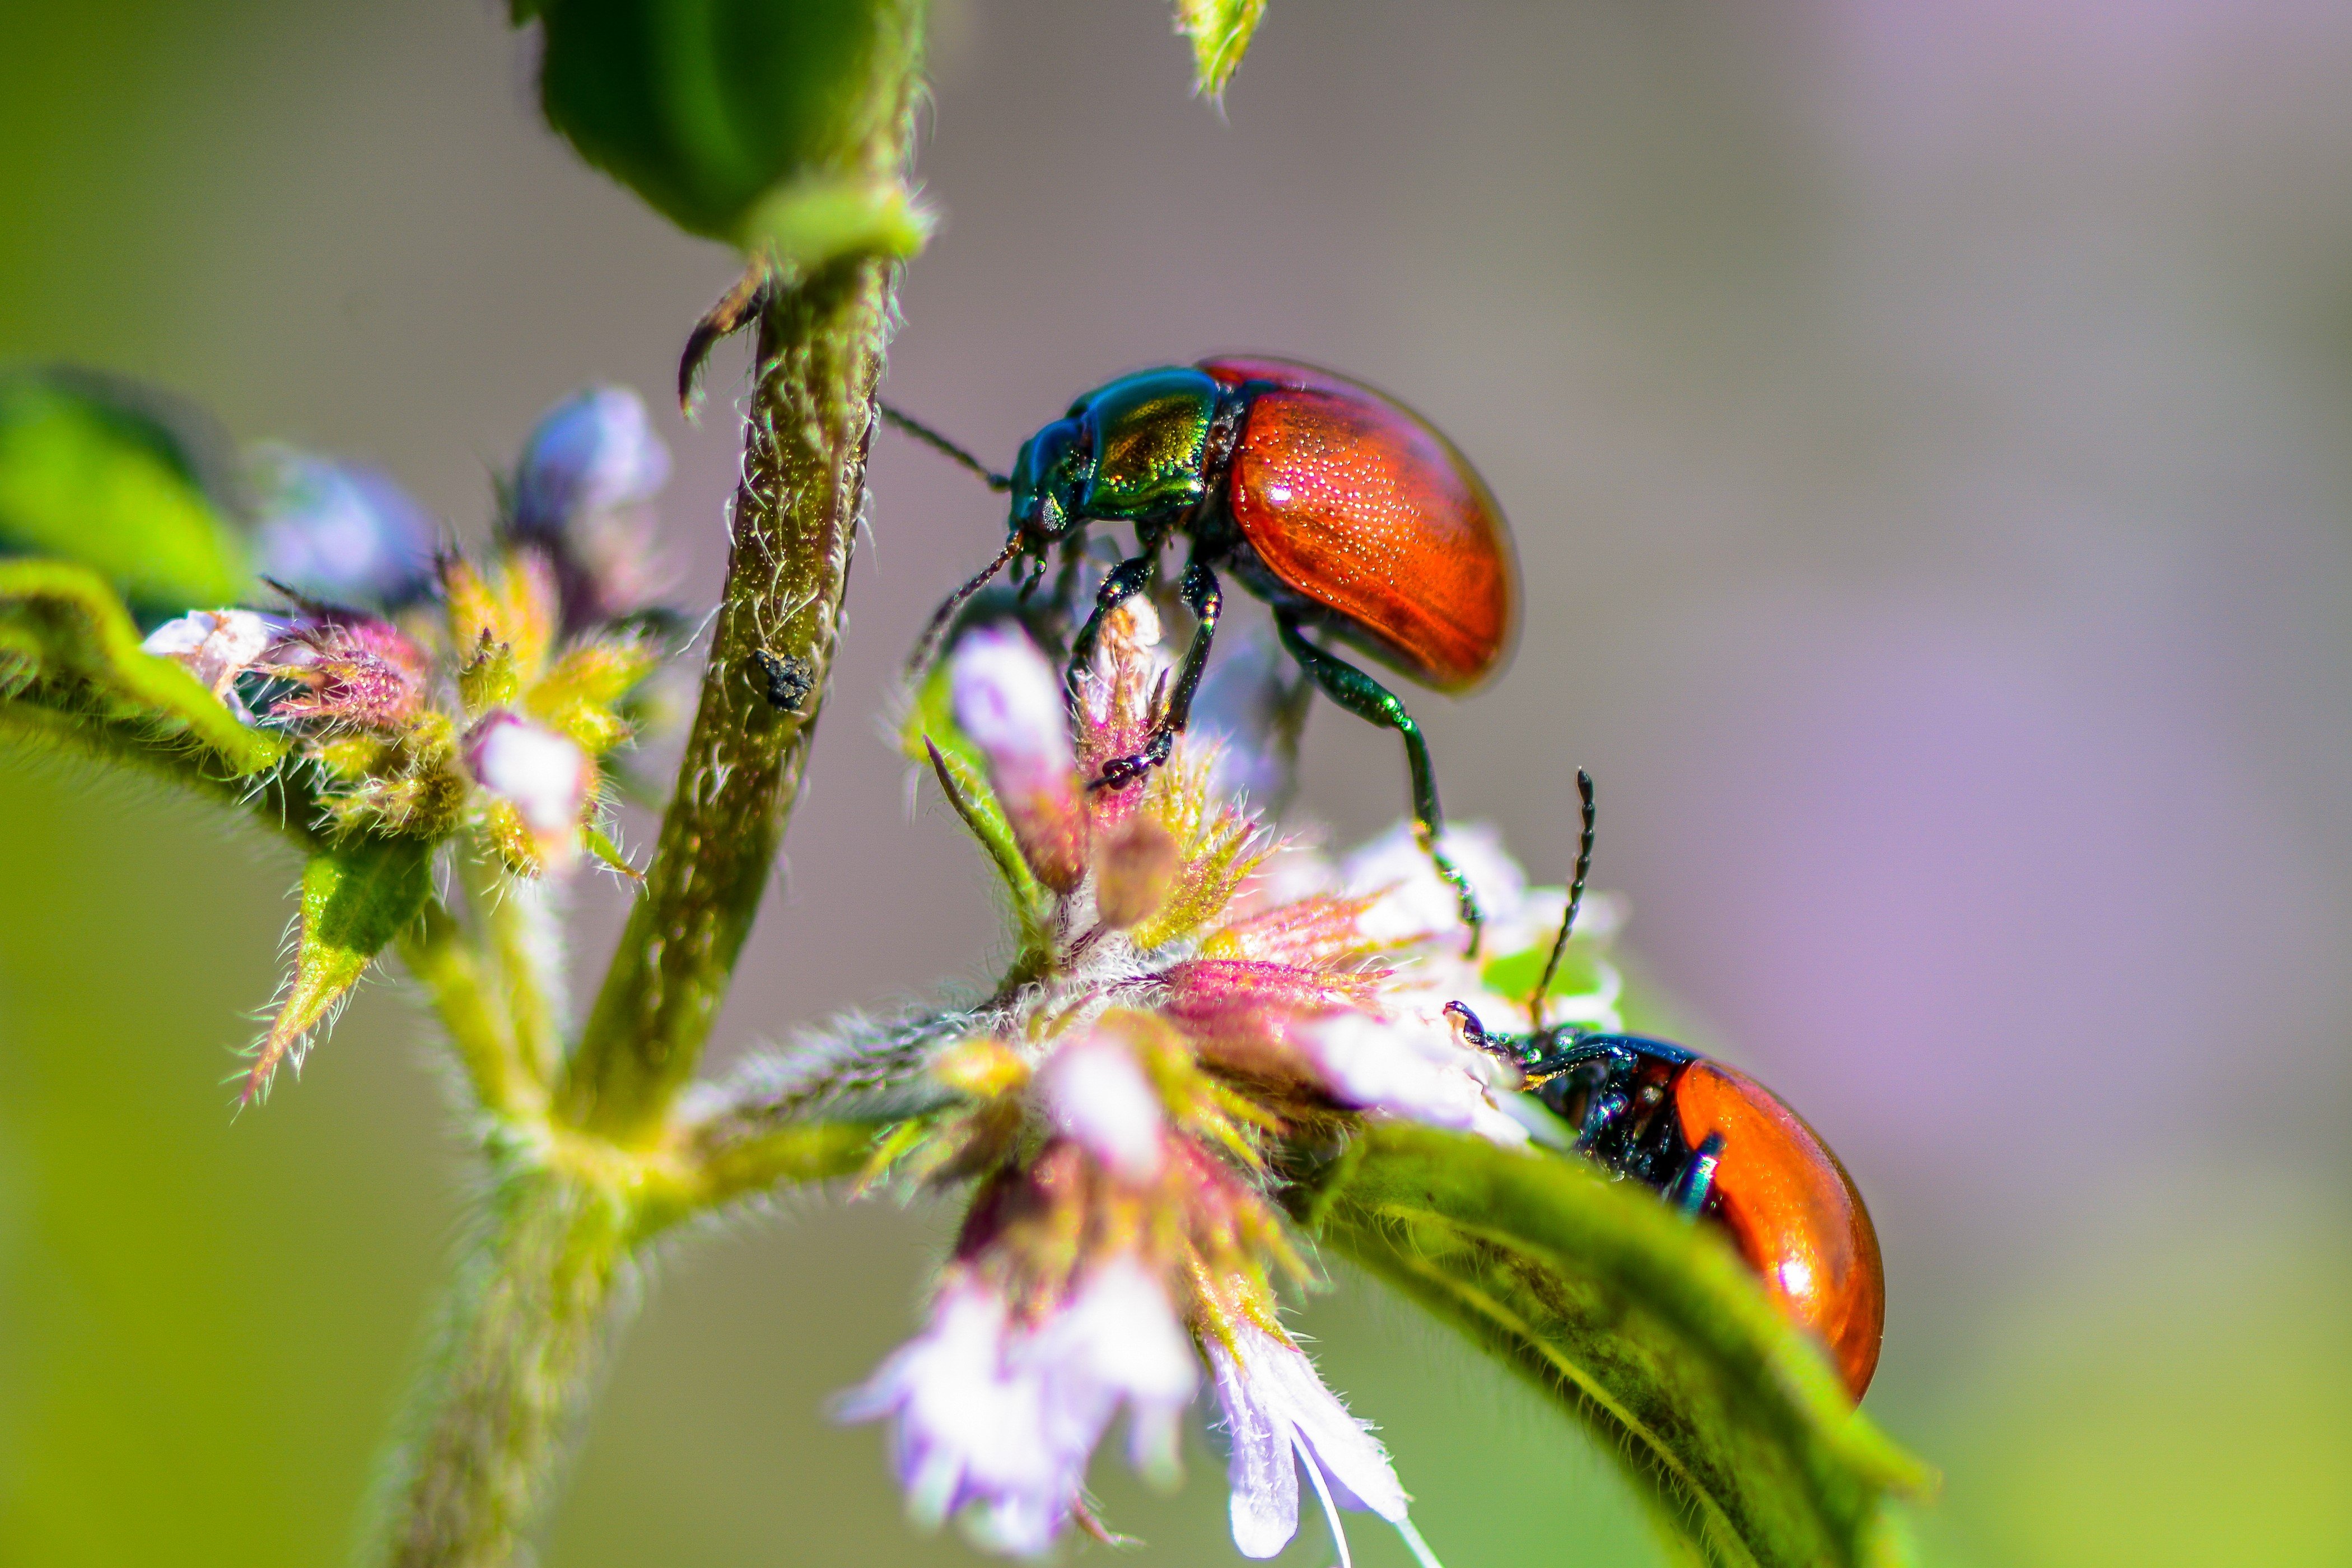 ladybugs, insects, macro, nature, colorful, flowers, Marius Surleac